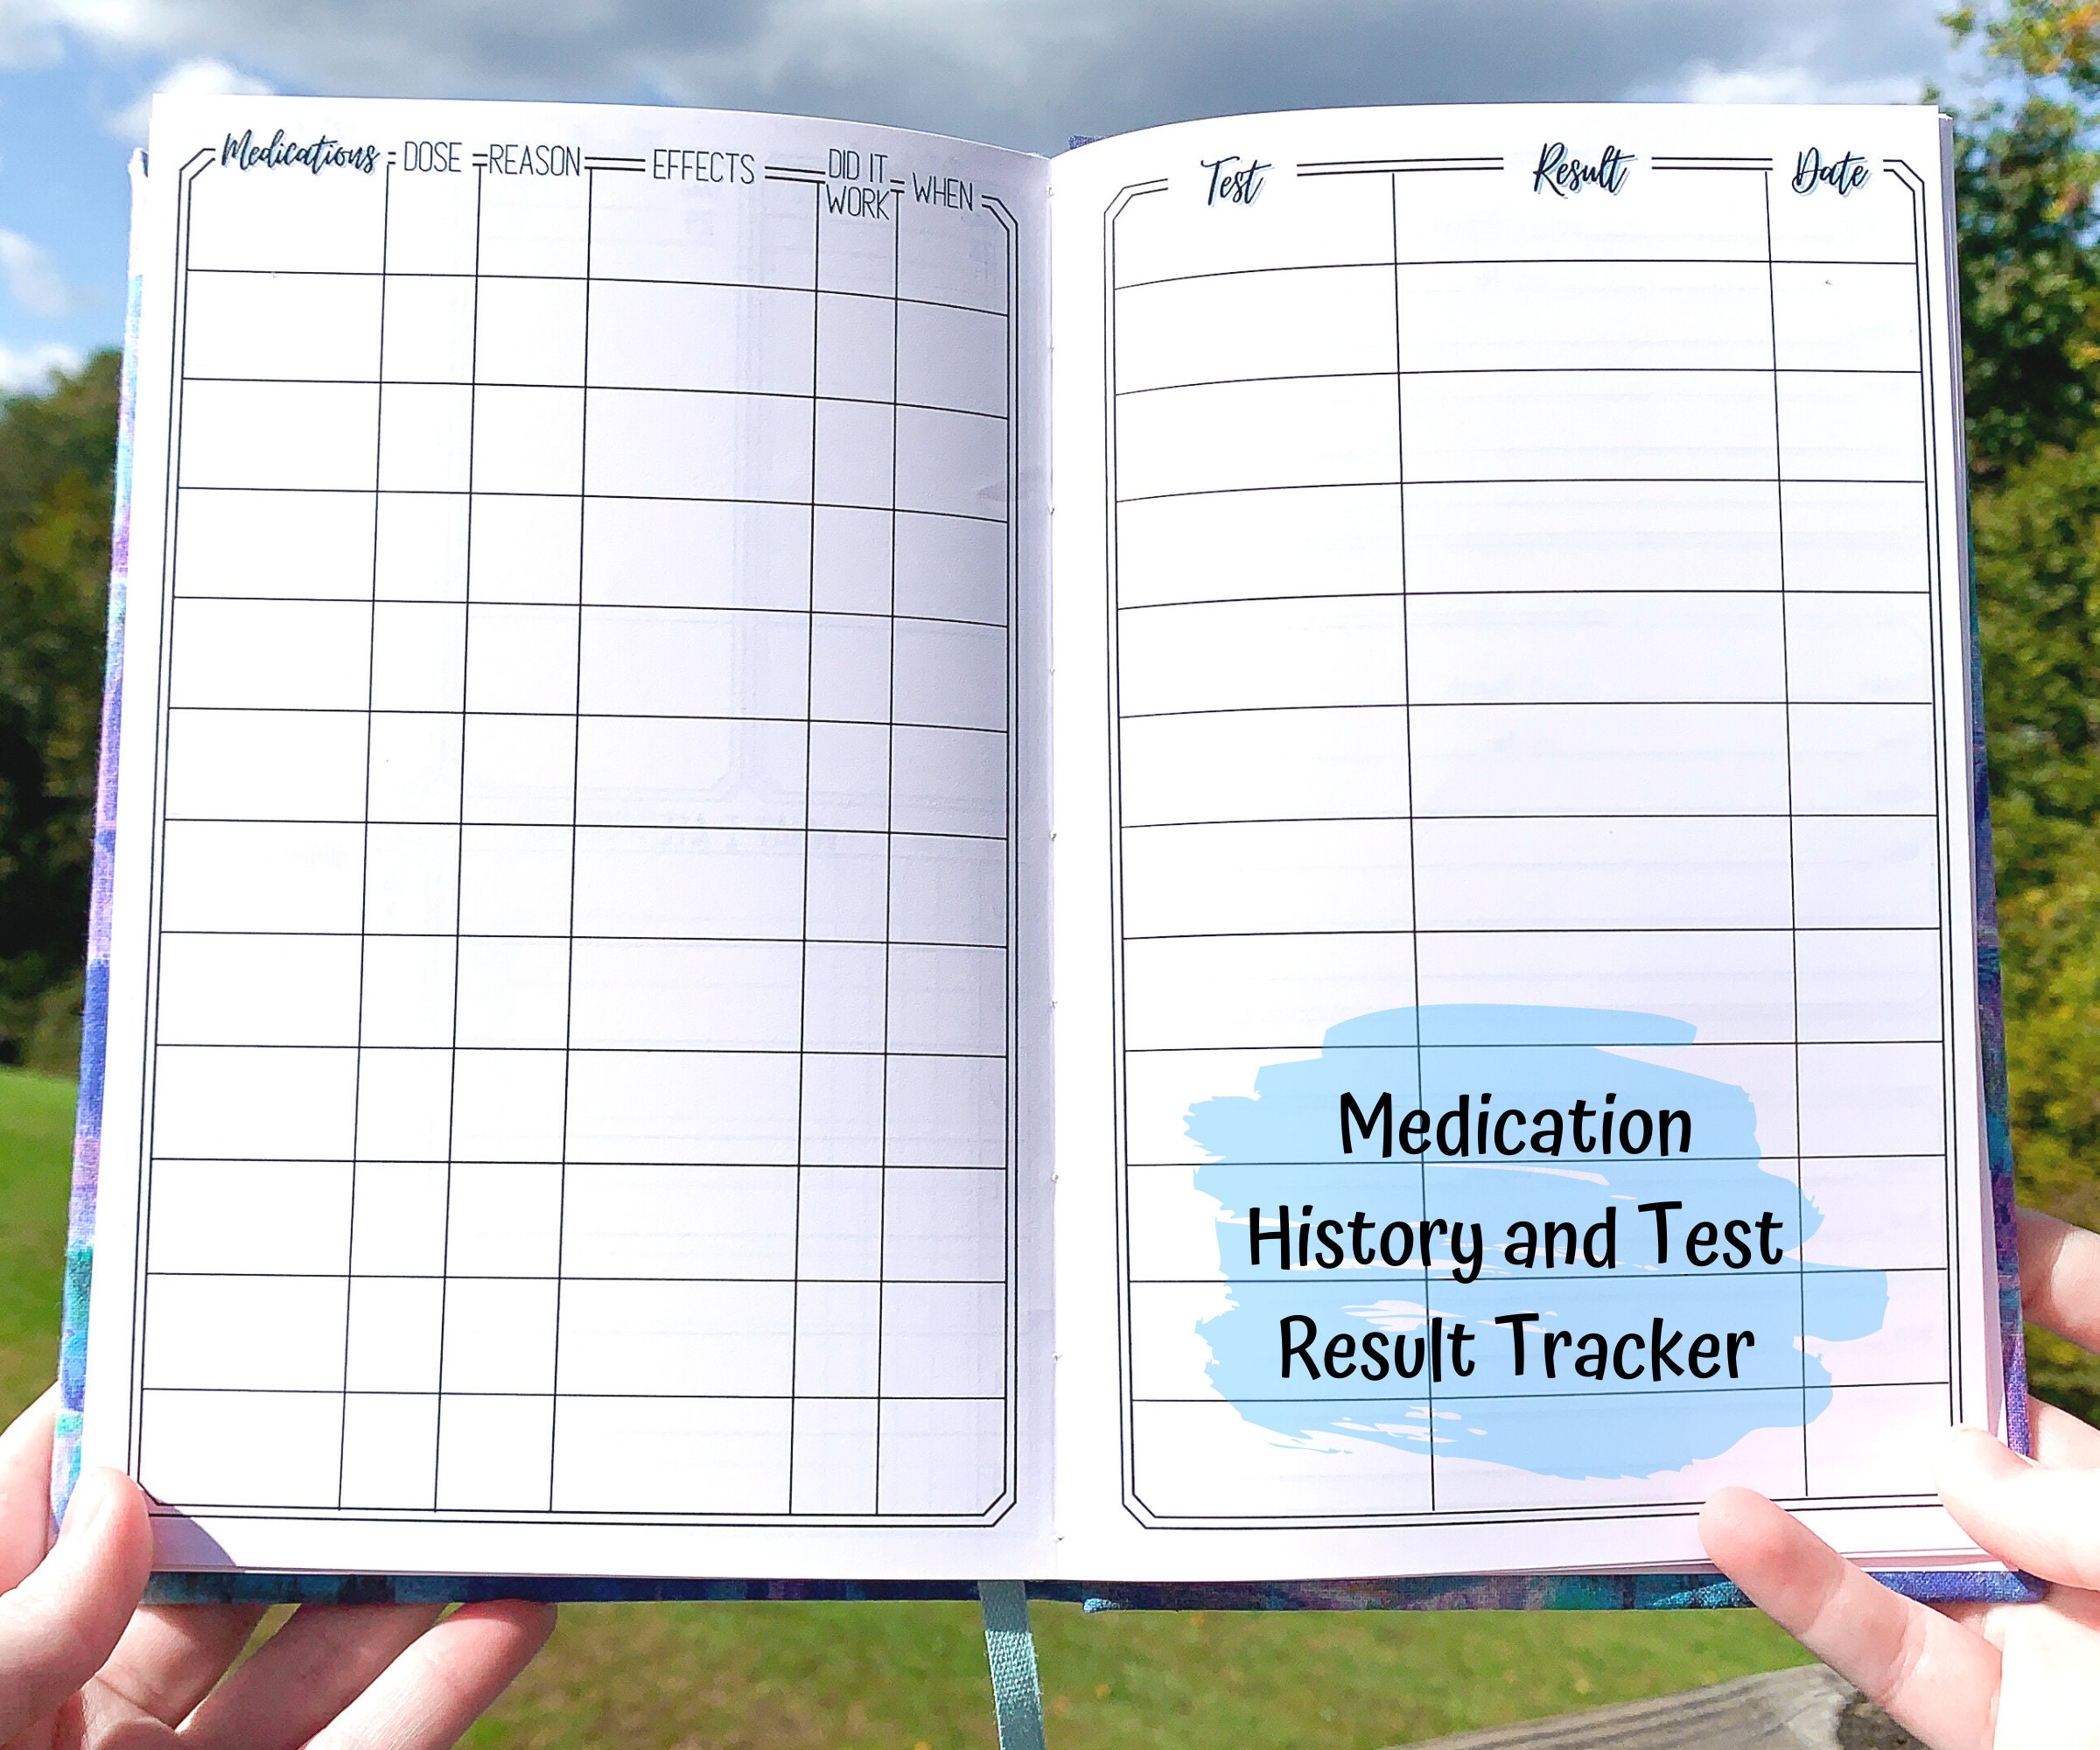 A note says Medication History and Test Result Tracker. The left page is a box split into 6 columns- medications, dose, reason, effects, did it work, and when. It has 12 rows. The right page has 3 columns- test, result, date. It has 12 rows too.